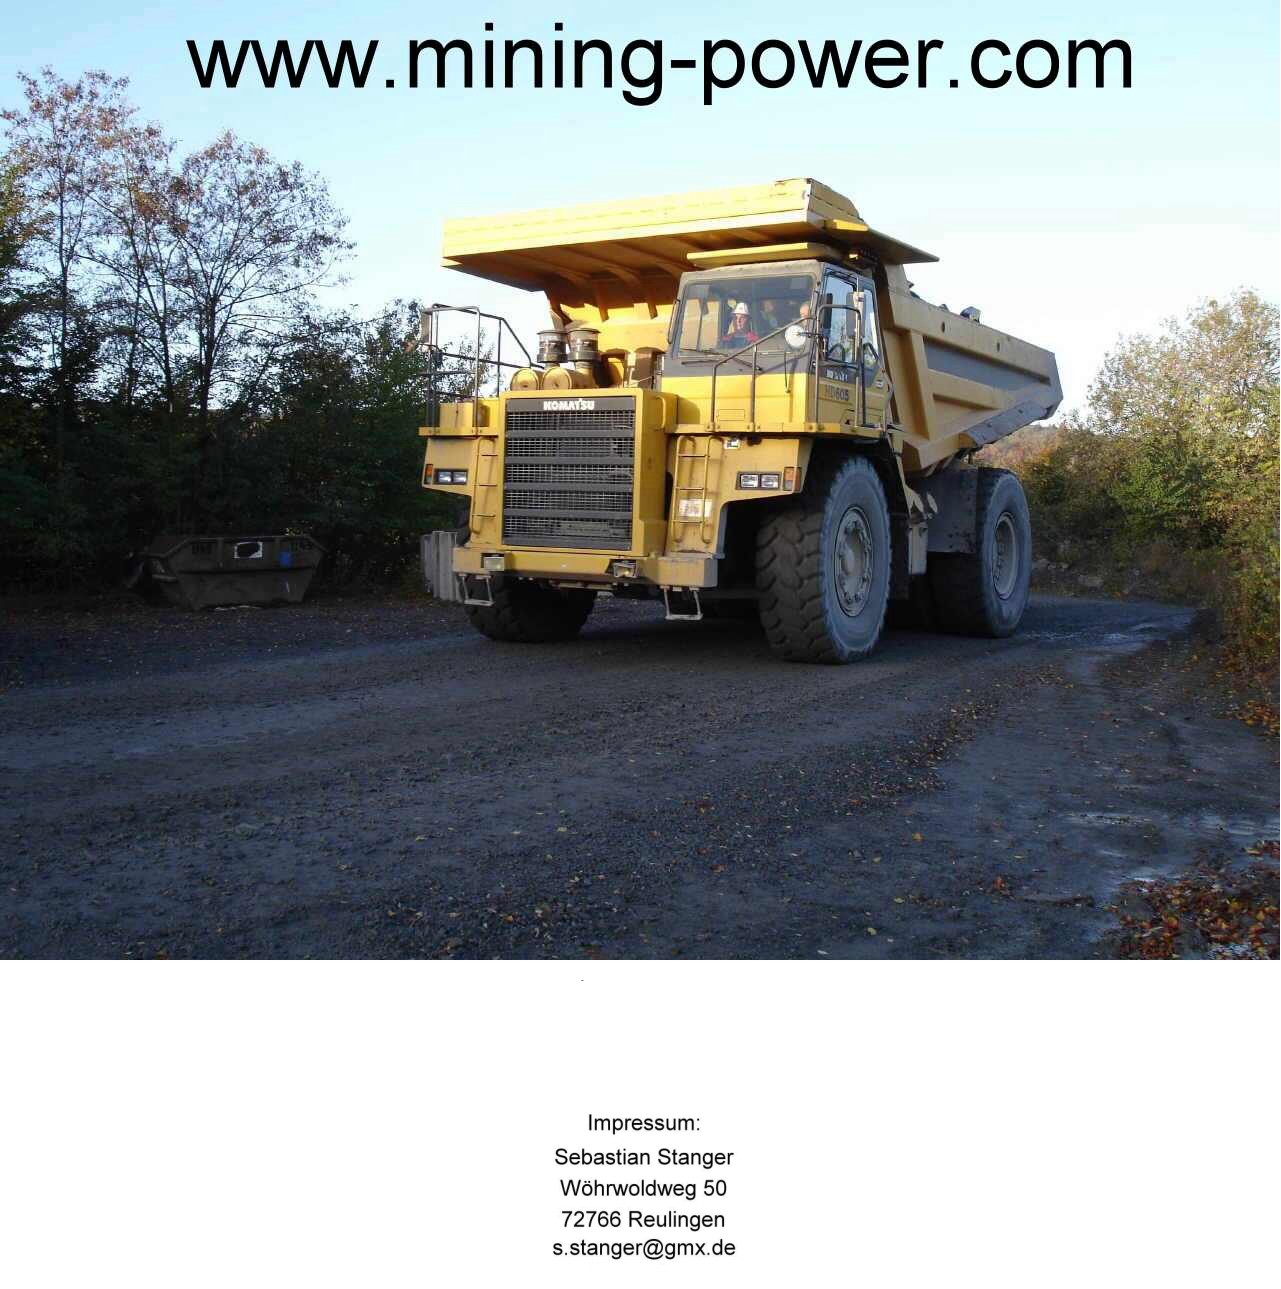 Welcome to www.mining-power.com!